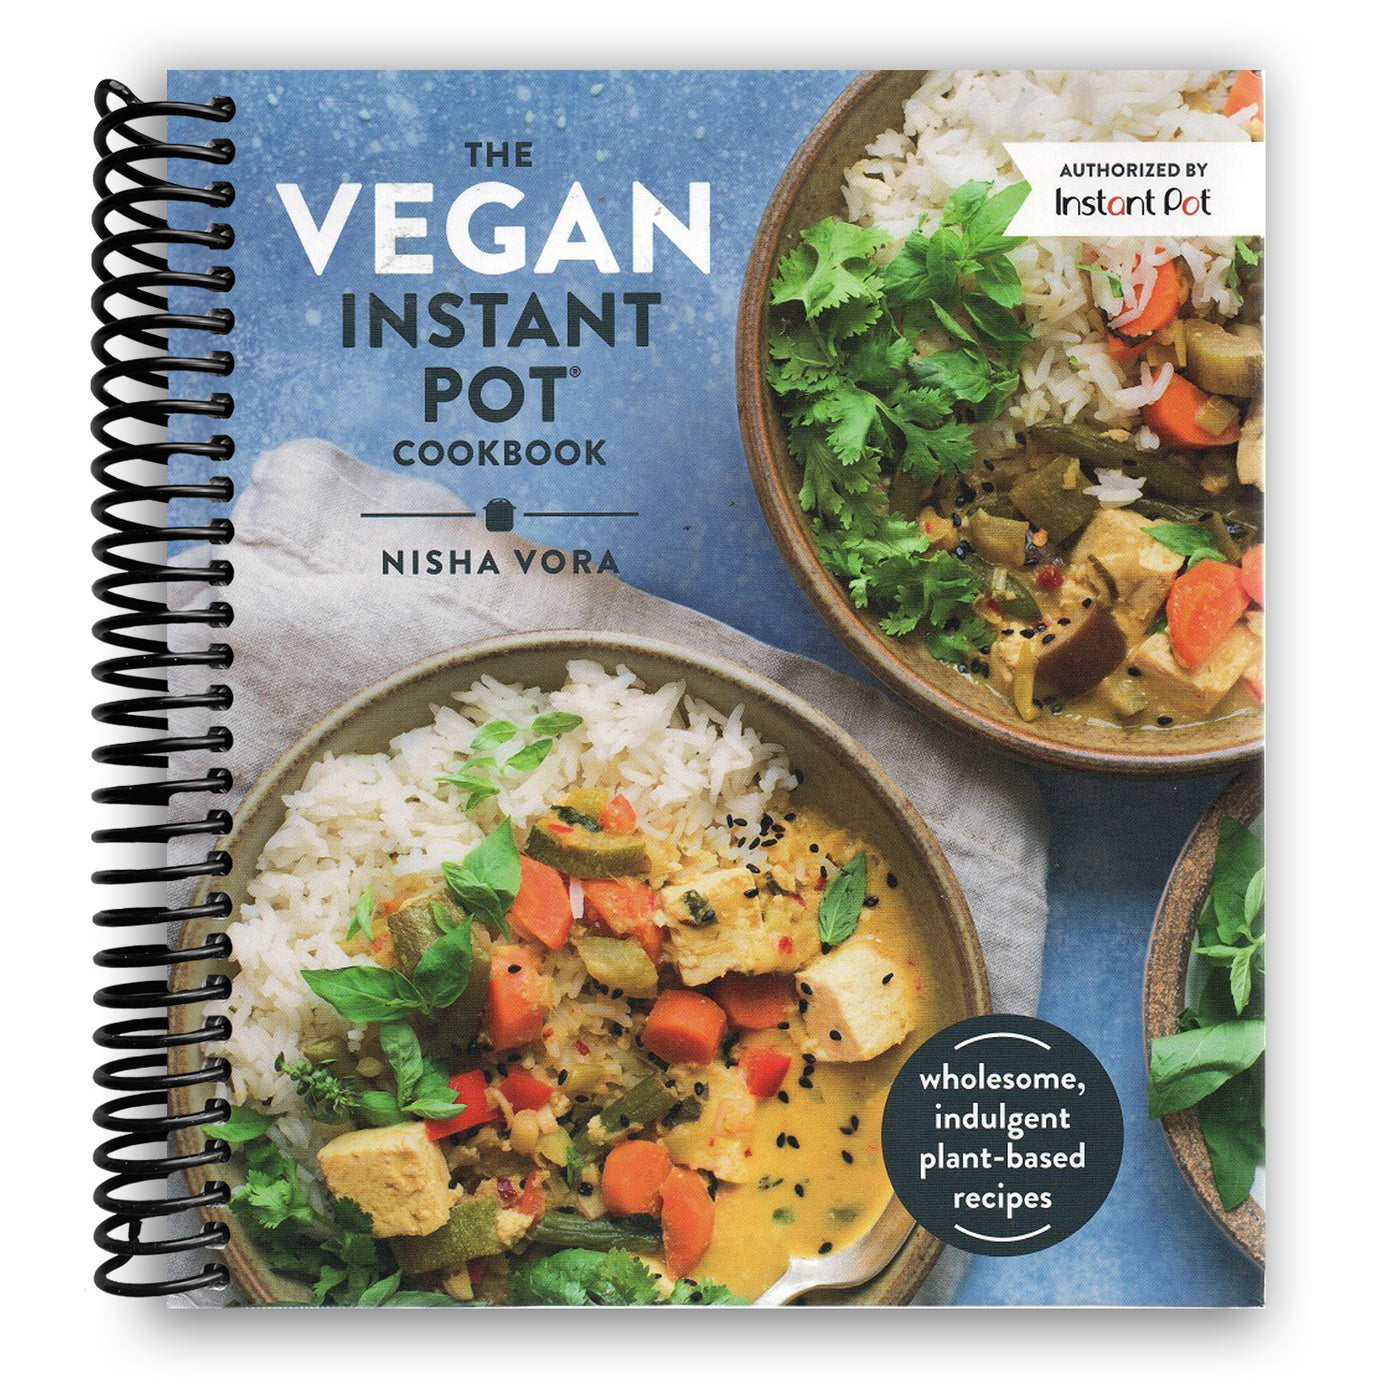 The Vegan Instant Pot Cookbook: Wholesome, Indulgent Plant-Based Recipes (Spiral Bound)